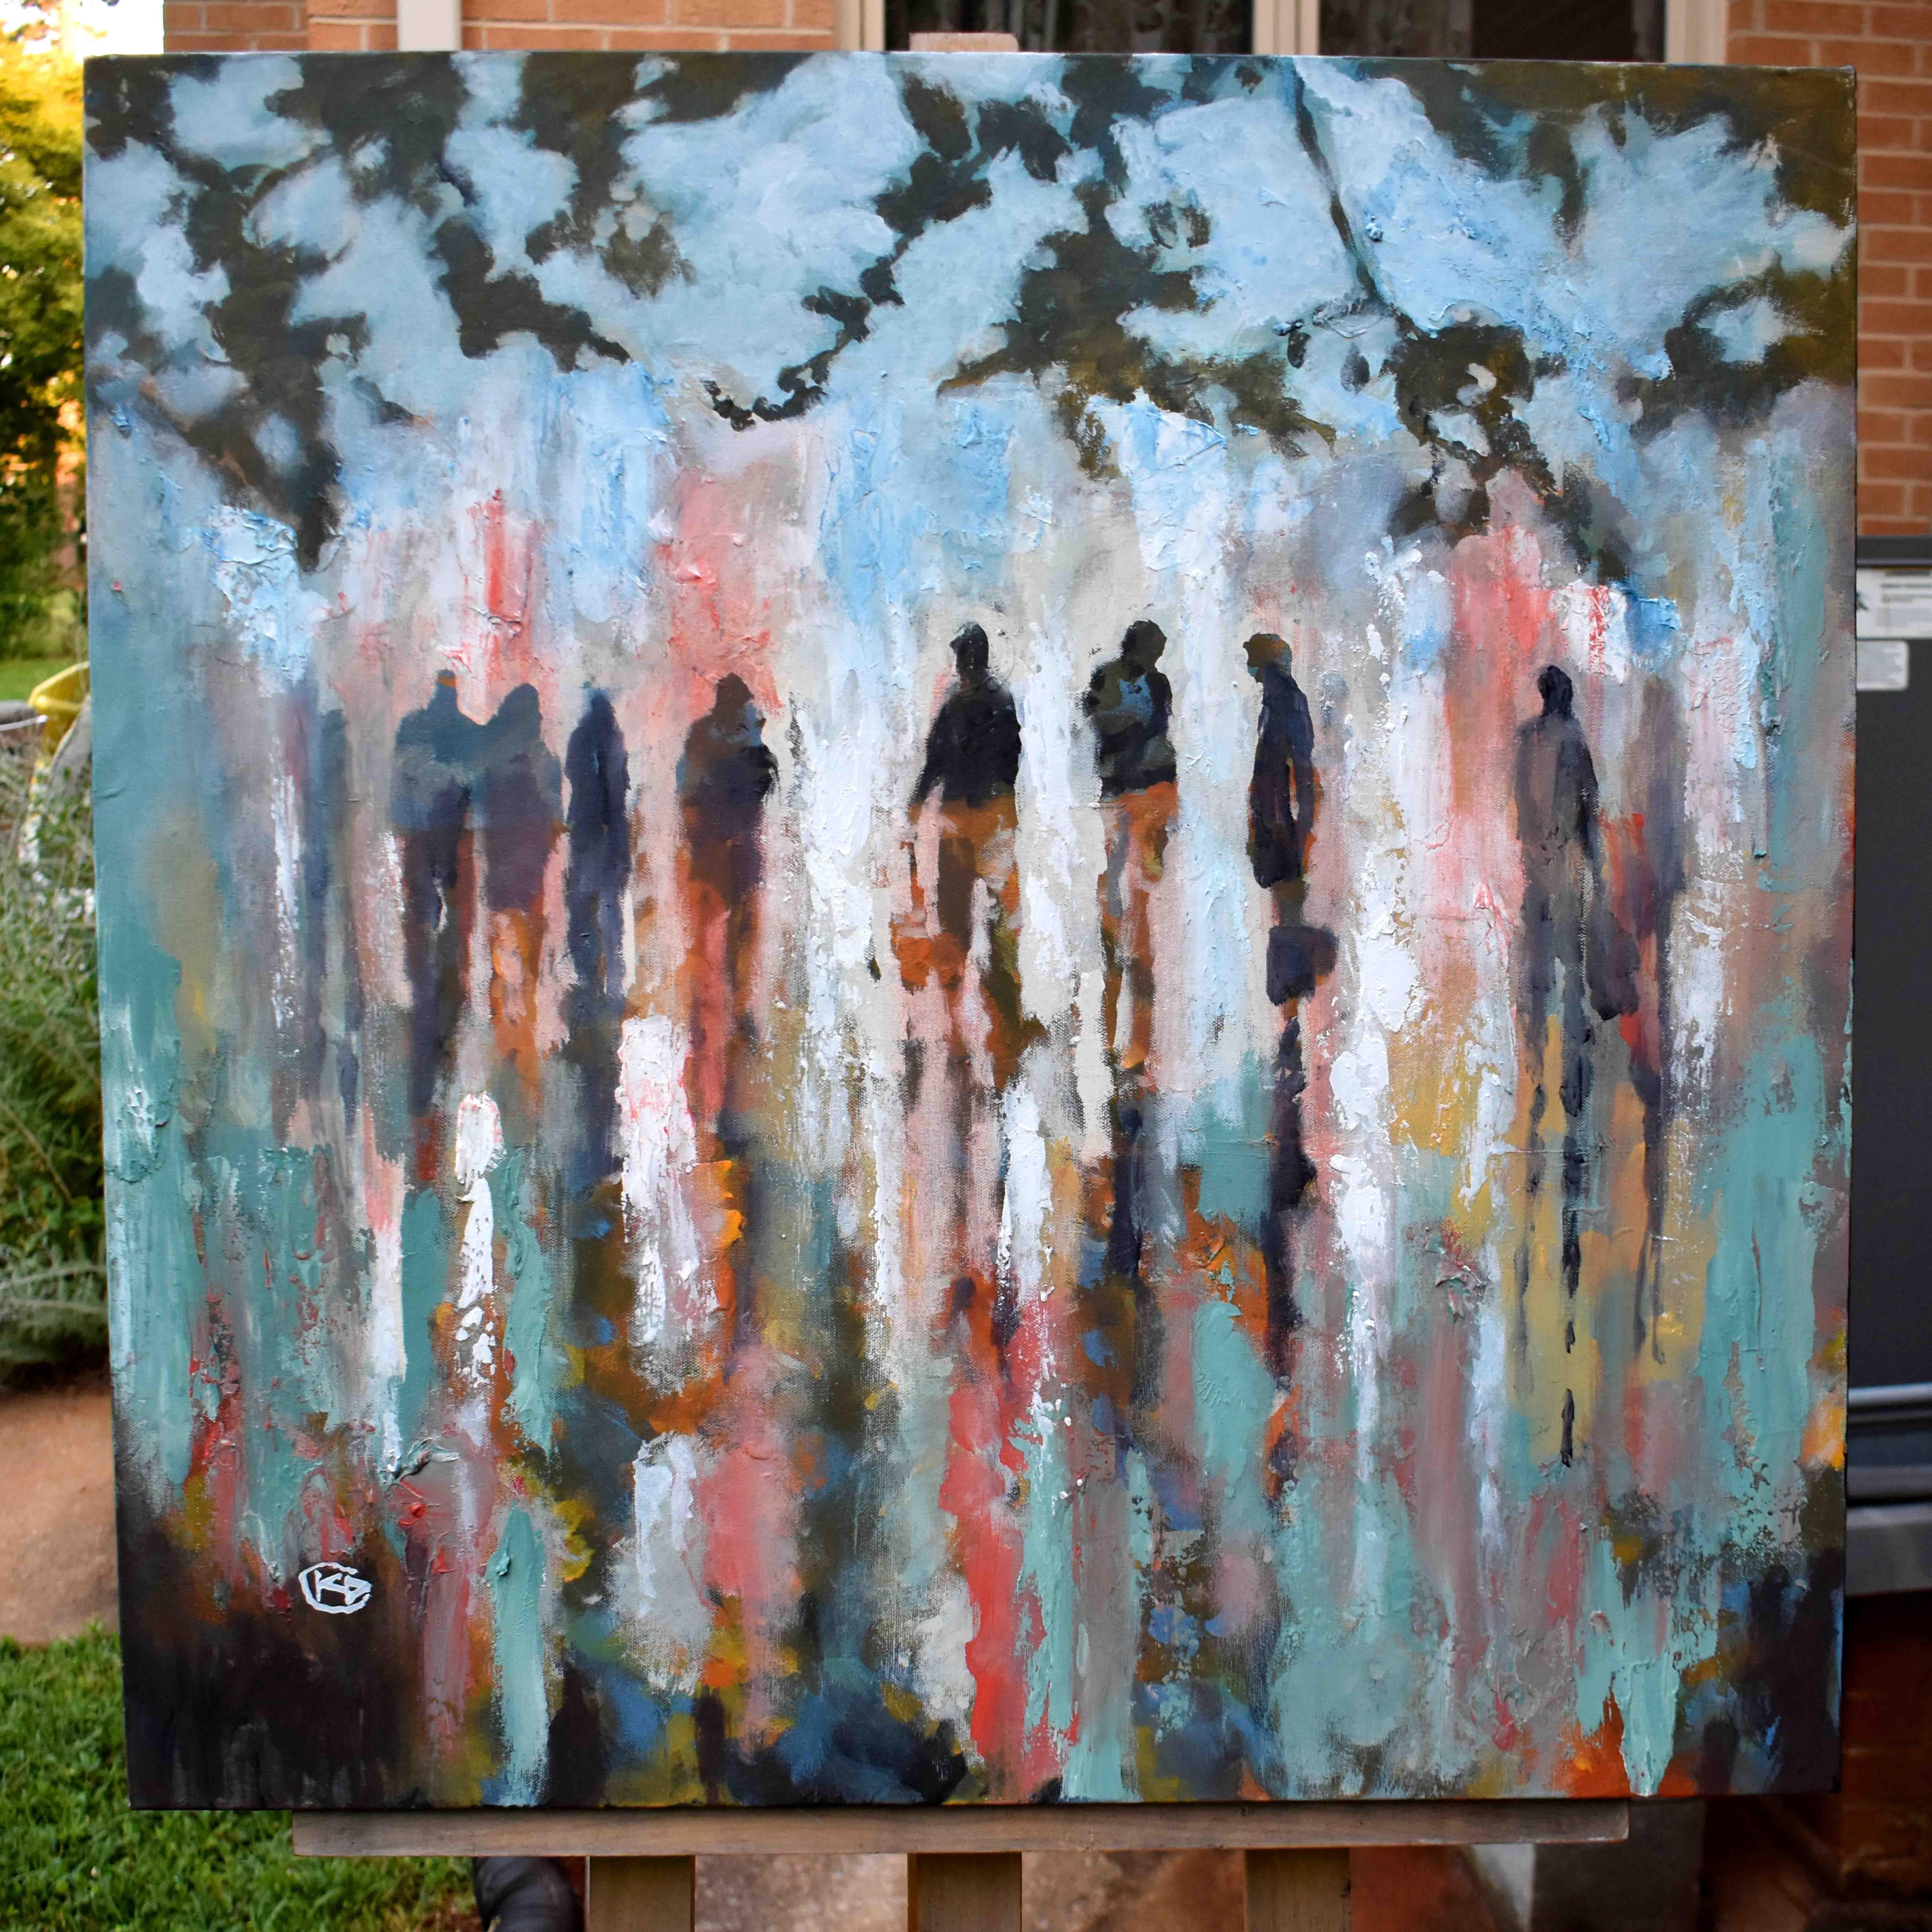 Meeting Is Over - Abstract Expressionist Painting by Kip Decker